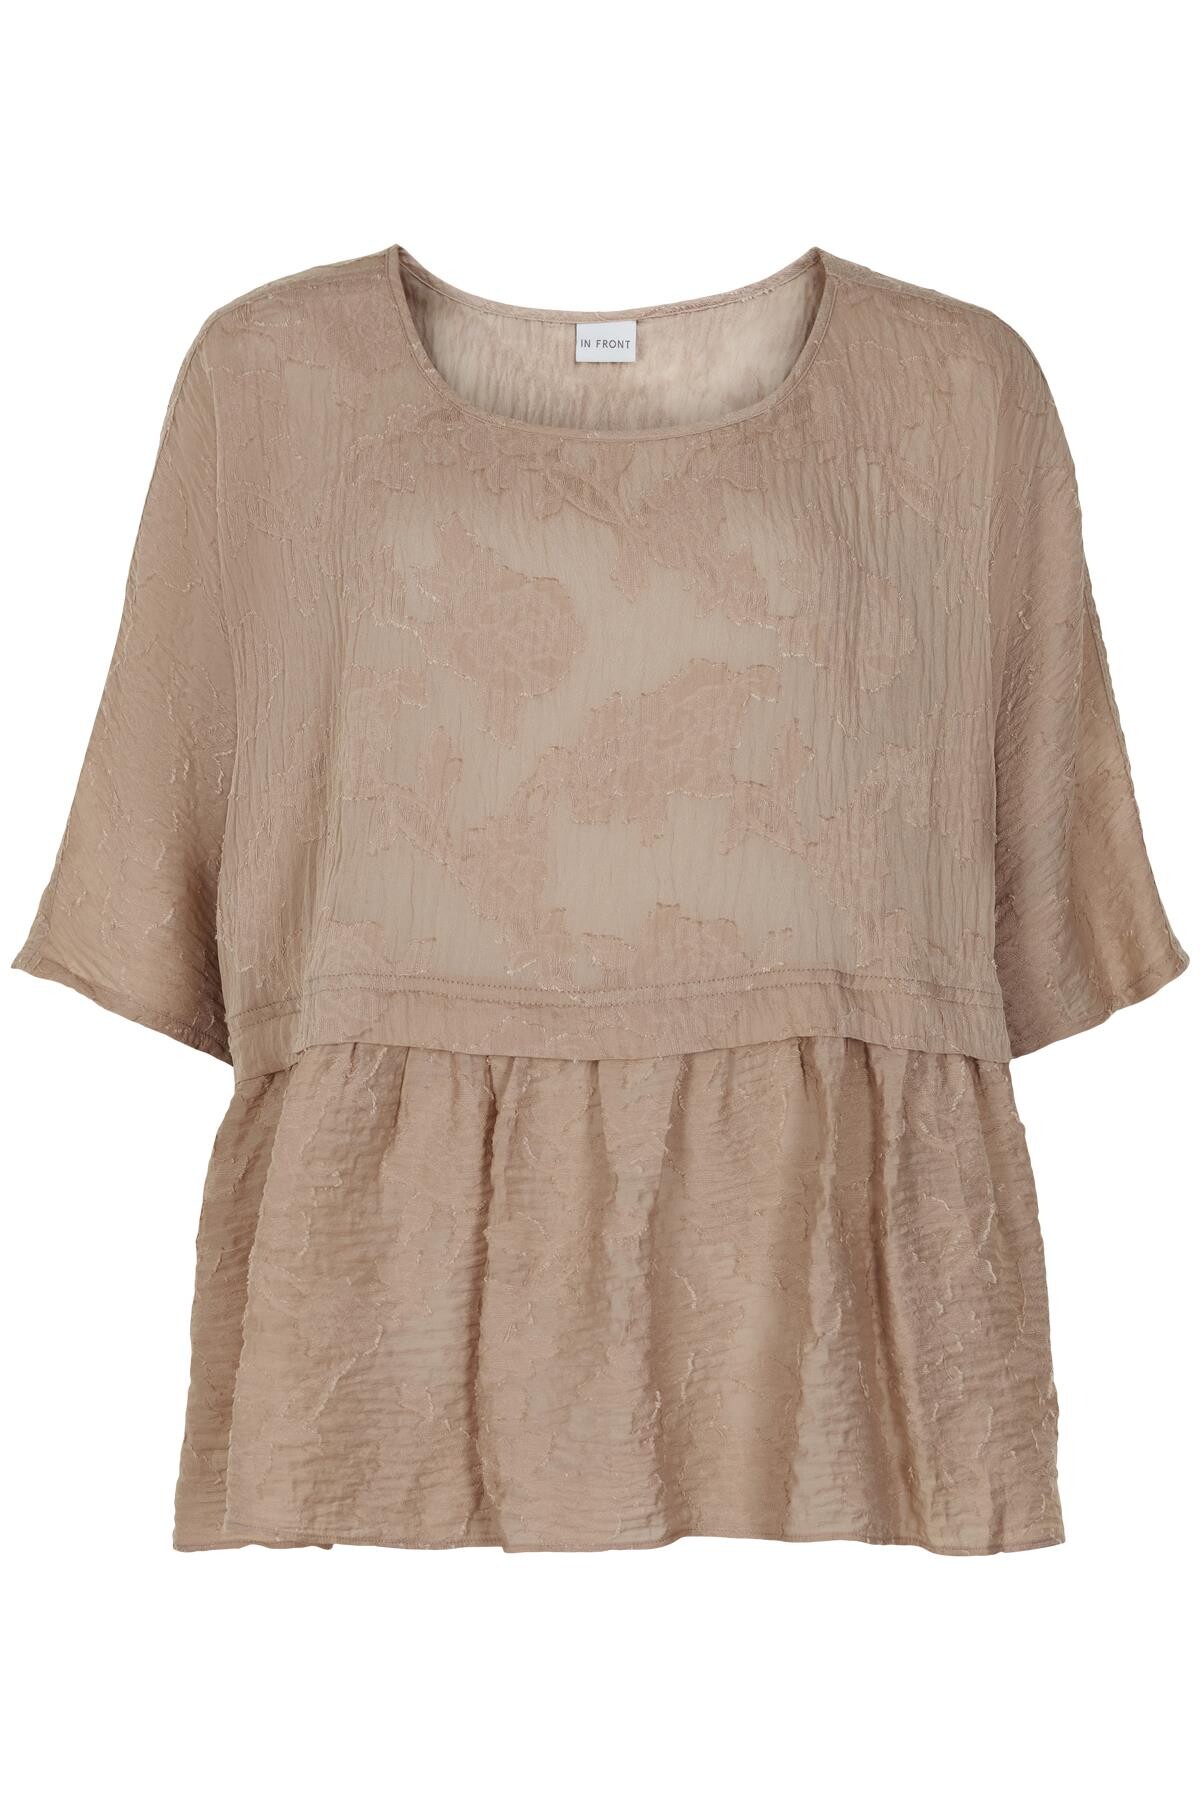 IN FRONT FINE BLOUSE 15088 191 (Sand 191, M/L)